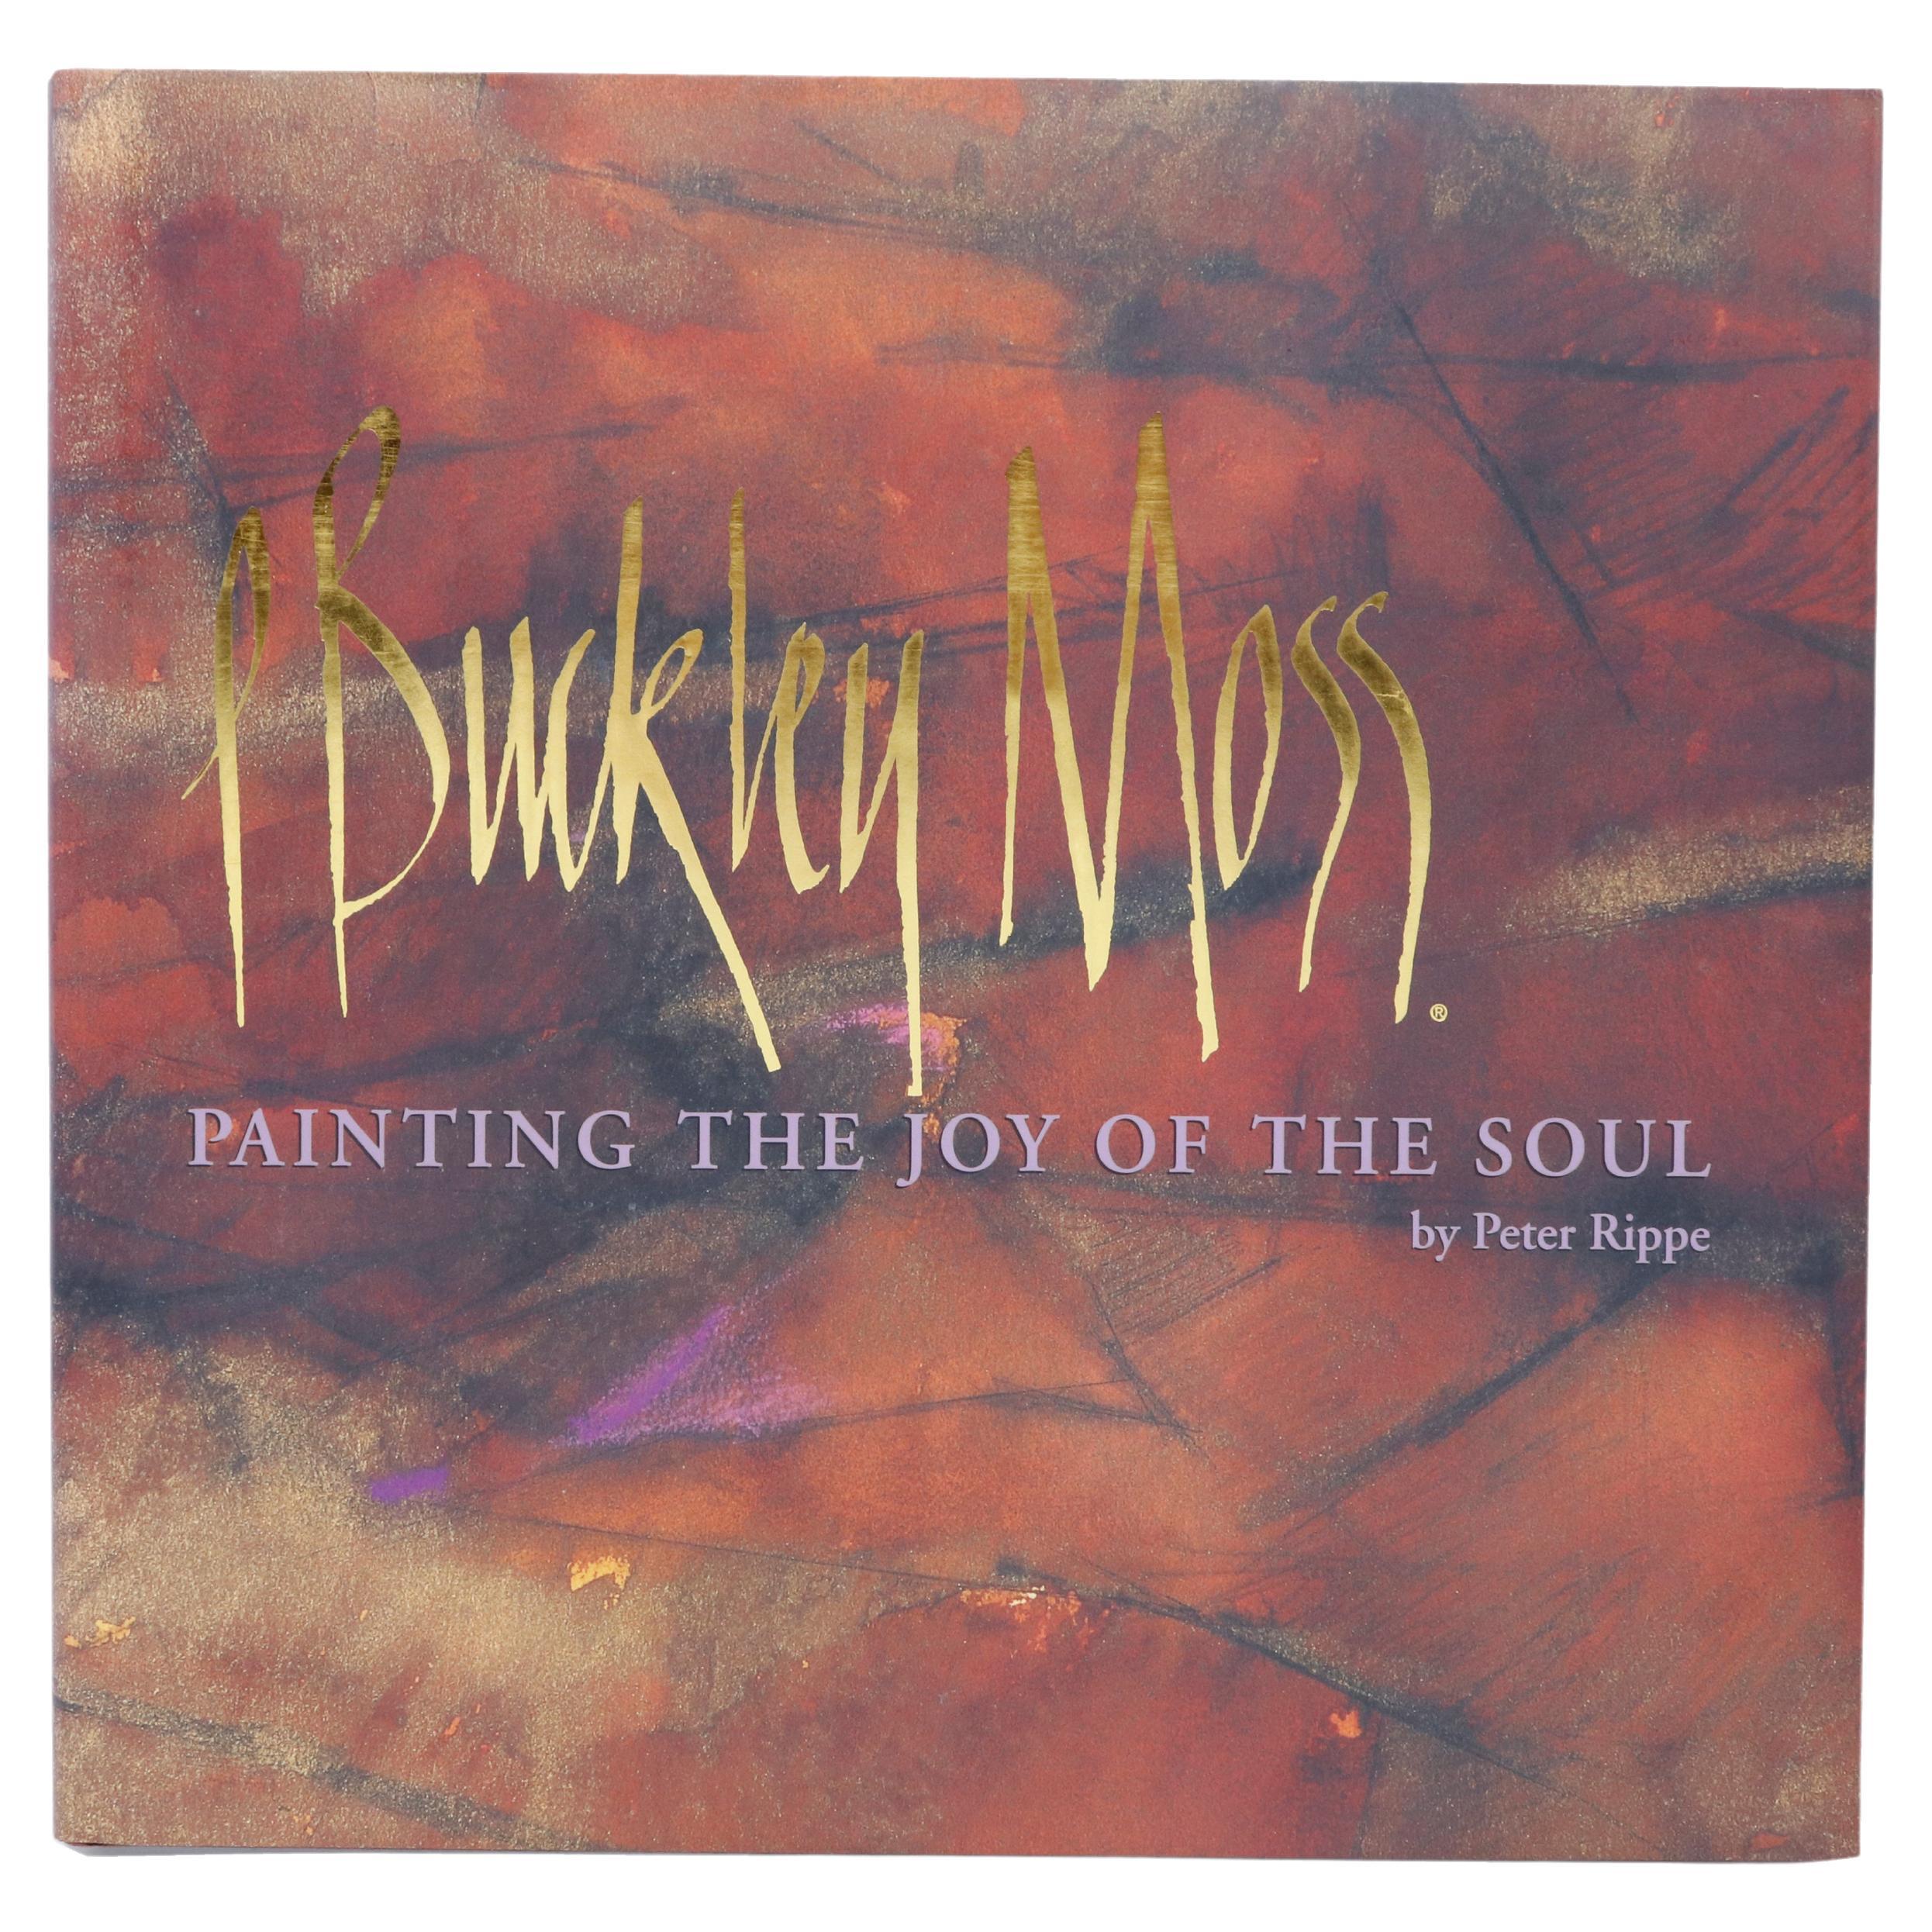 P Buckley Moss, Painting the Joy of the Soul For Sale